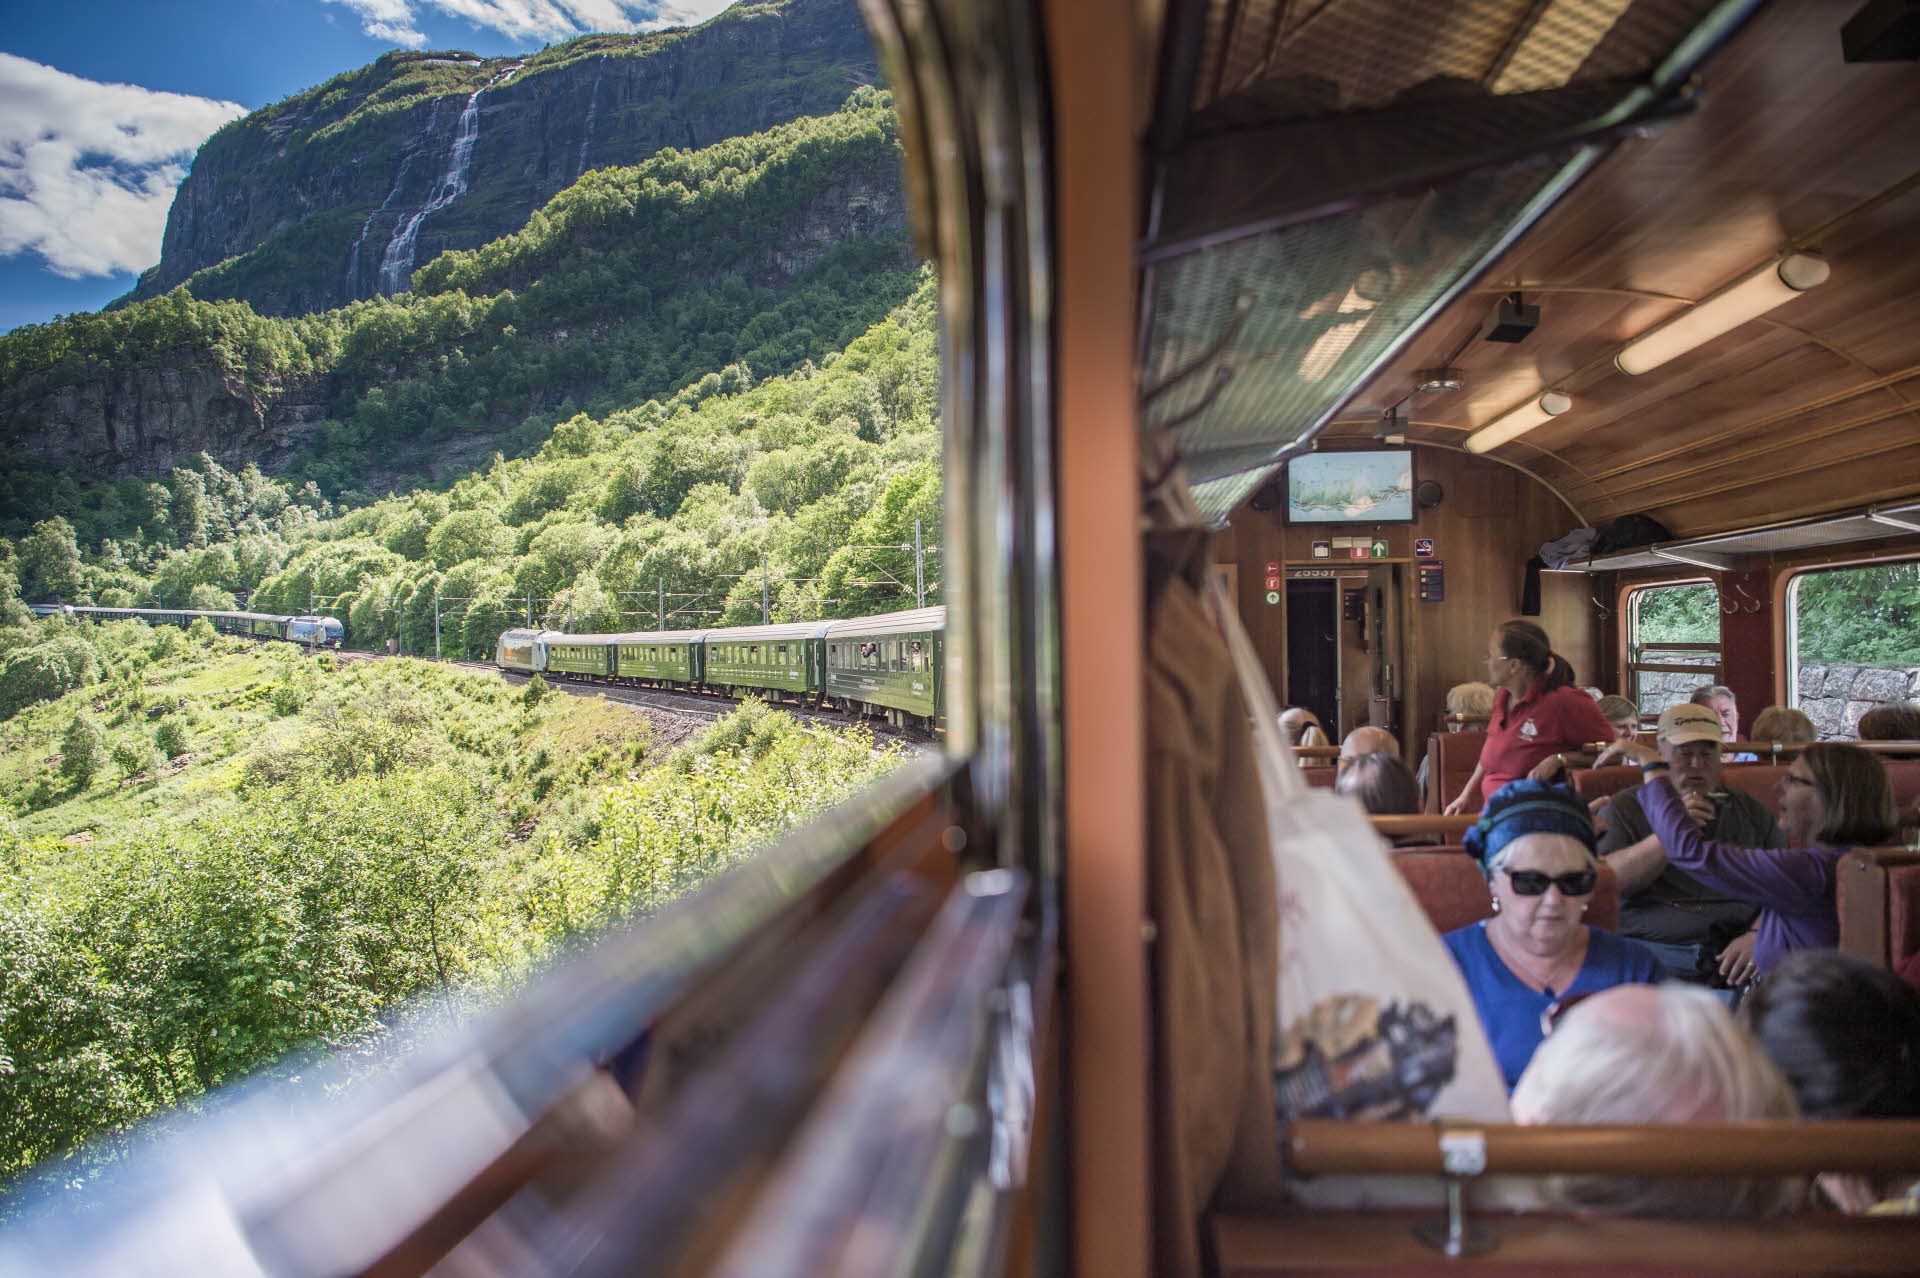 A view towards the Flåmsdalen Valley and an oncoming train from a window on the Flåm Railway